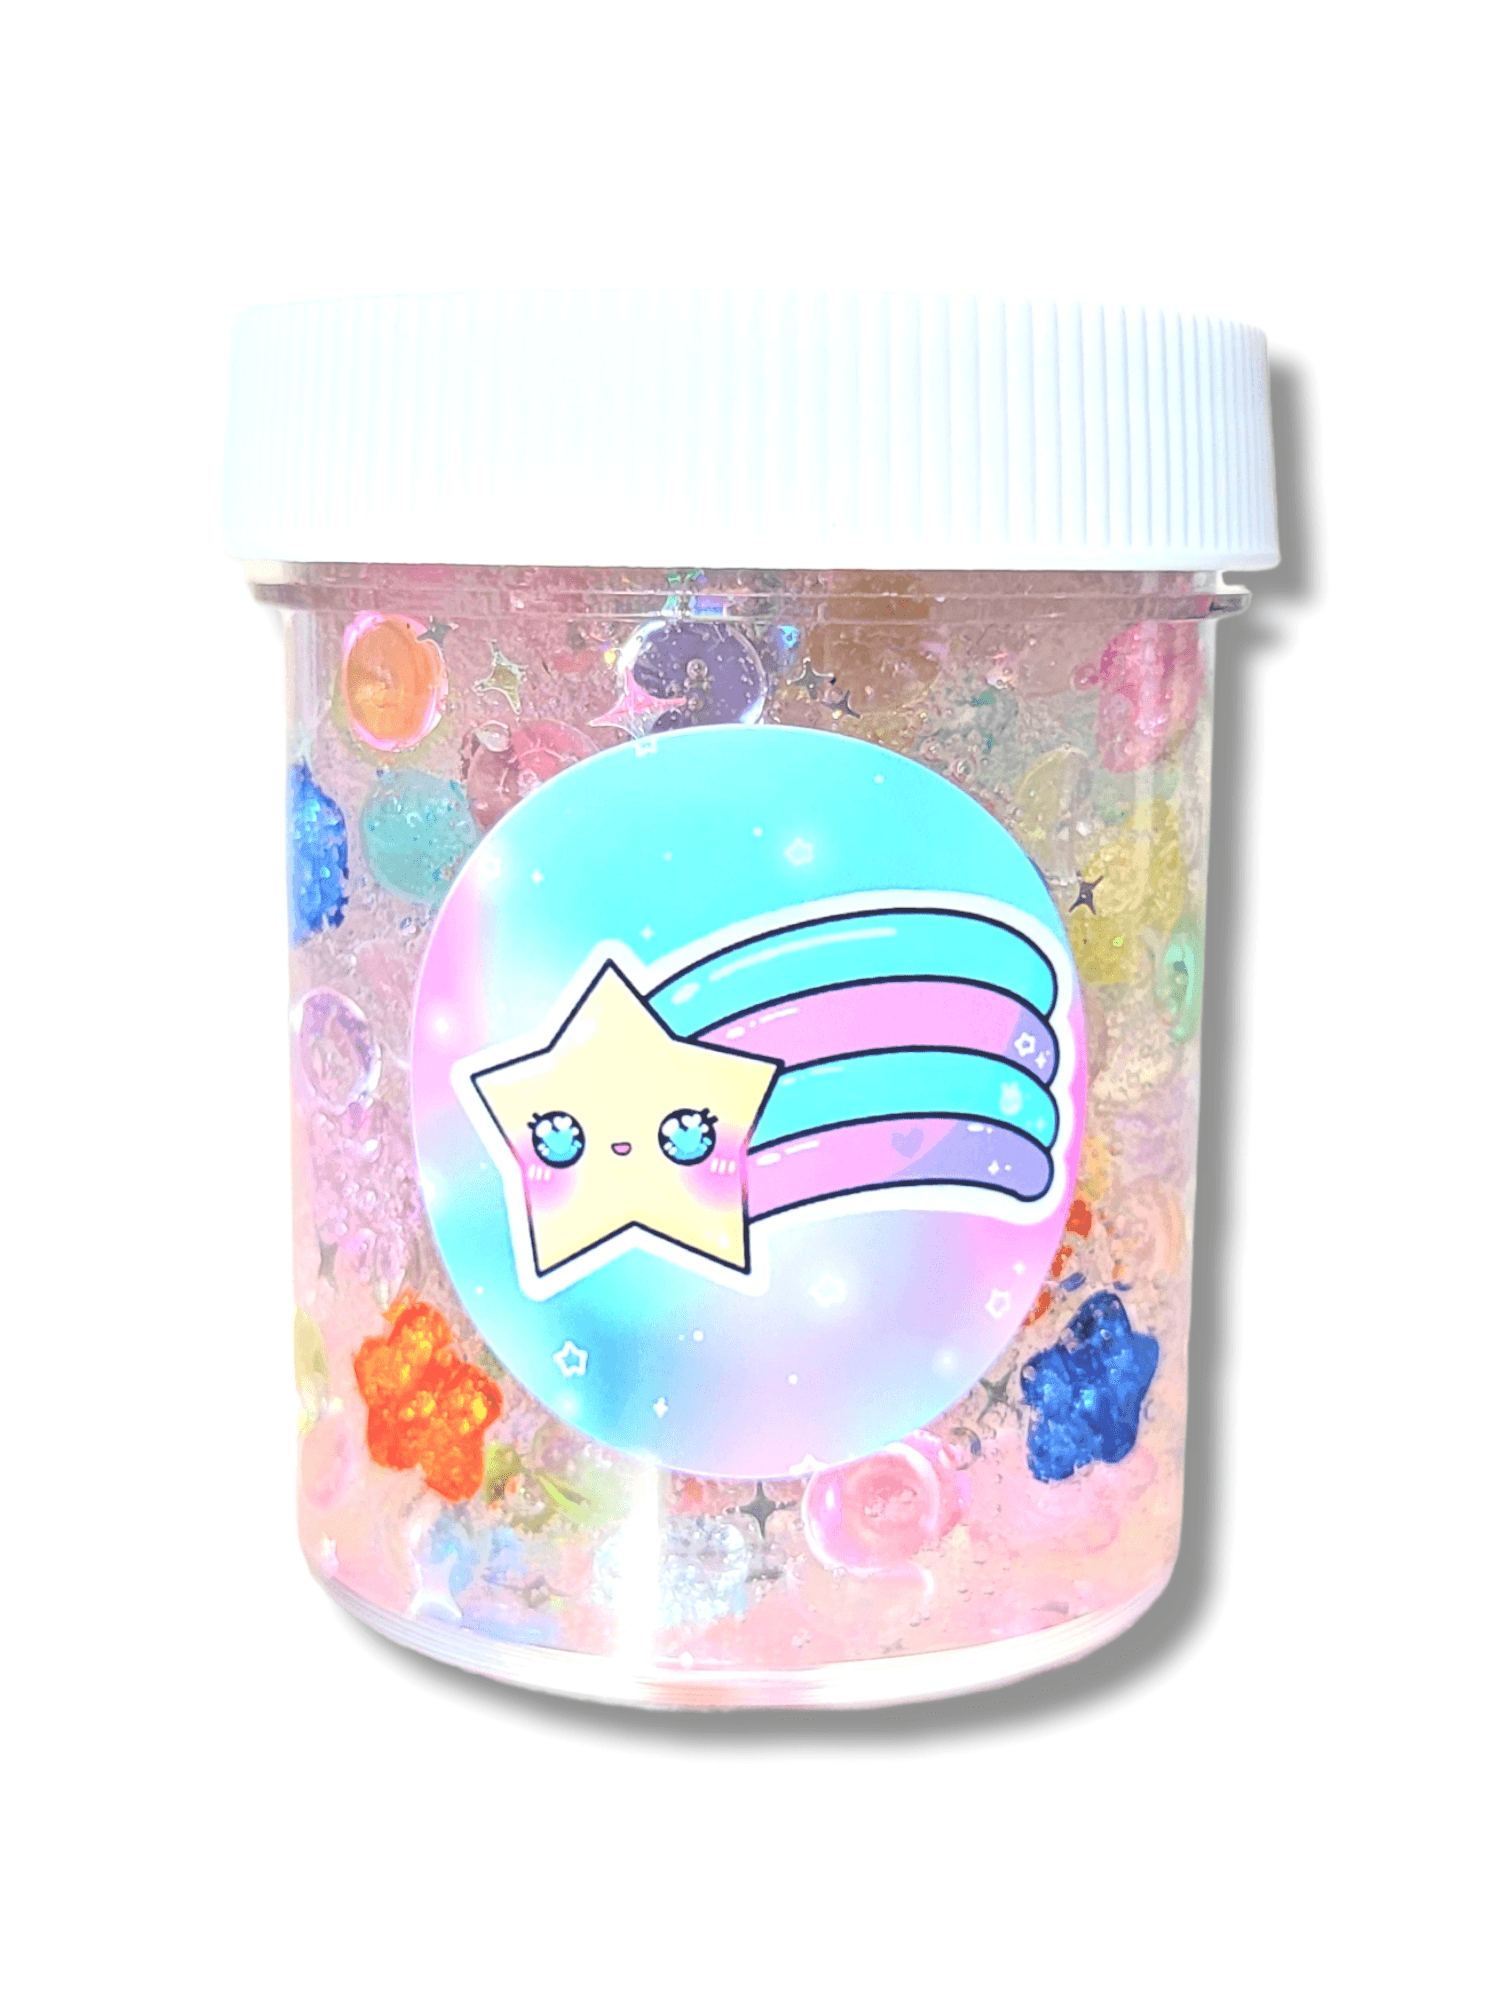 Shooting Stars Crunchy Handmade Scented Clear Slime Slime by Hoshimi Slimes LLC | Hoshimi Slimes LLC